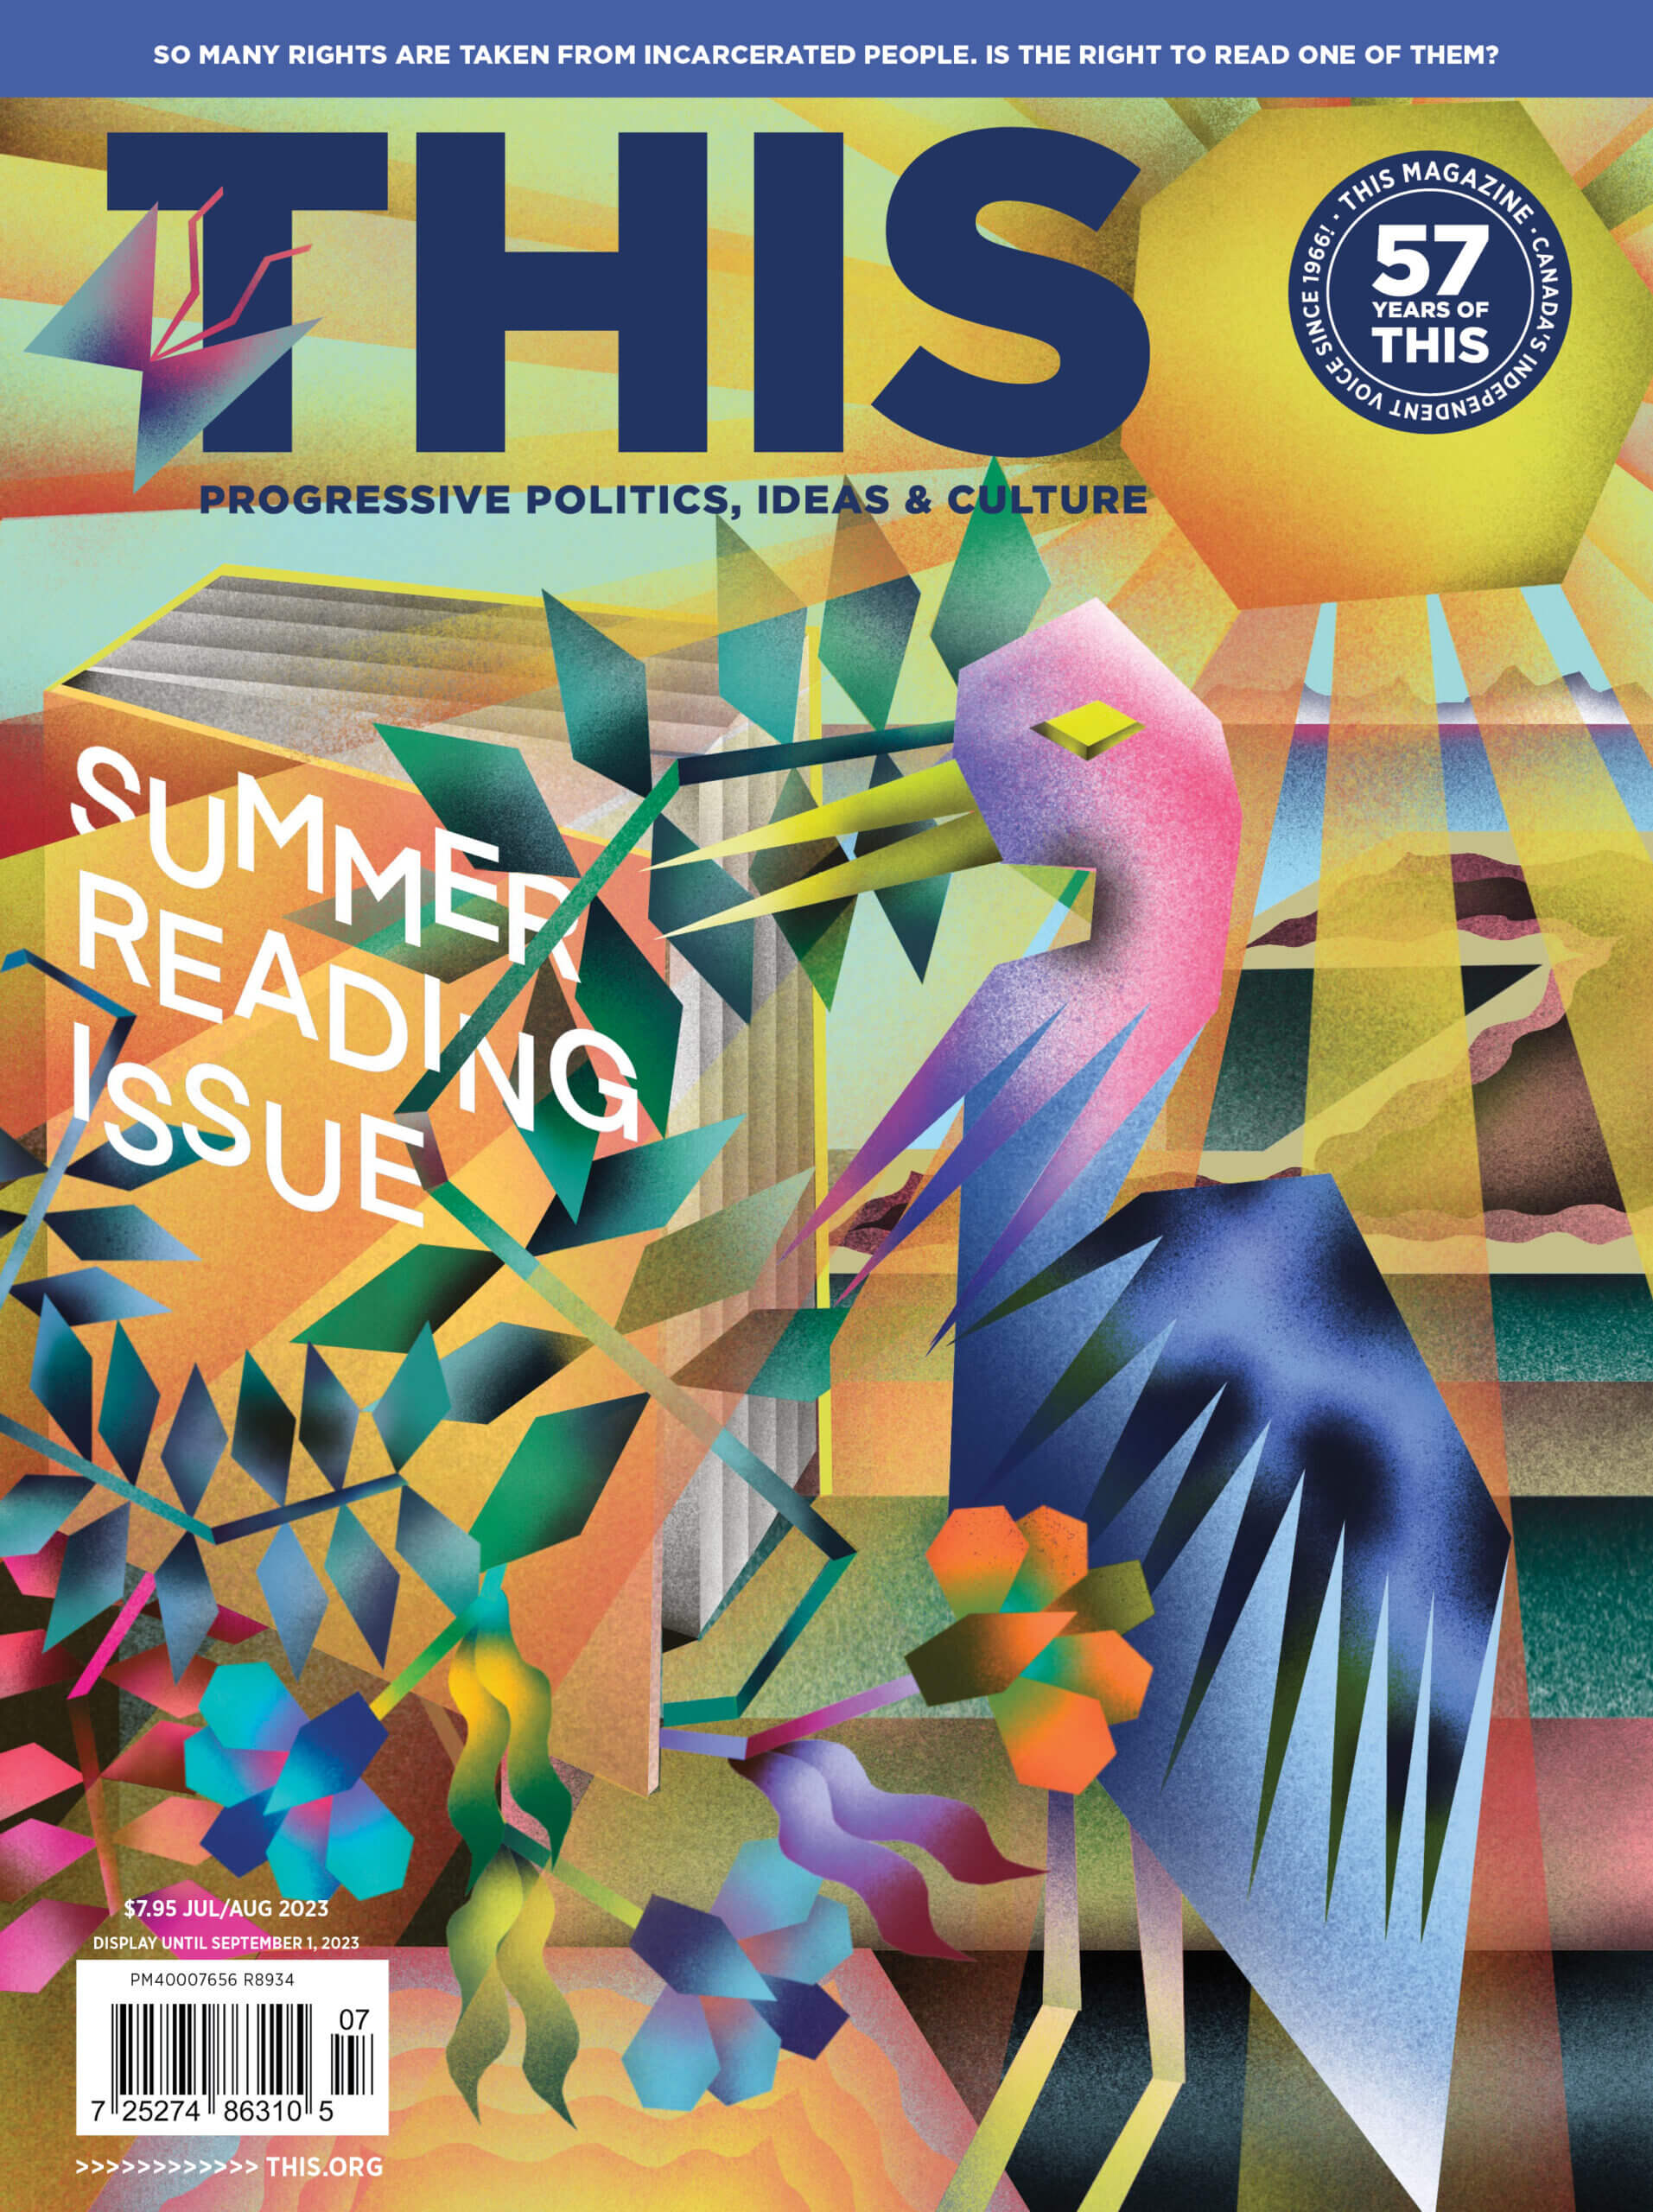 A brightly coloured bird picks out a book to read, ensconced in rainbows and sunshine. The words Summer Reading Issue are emblazoned on a book's cover